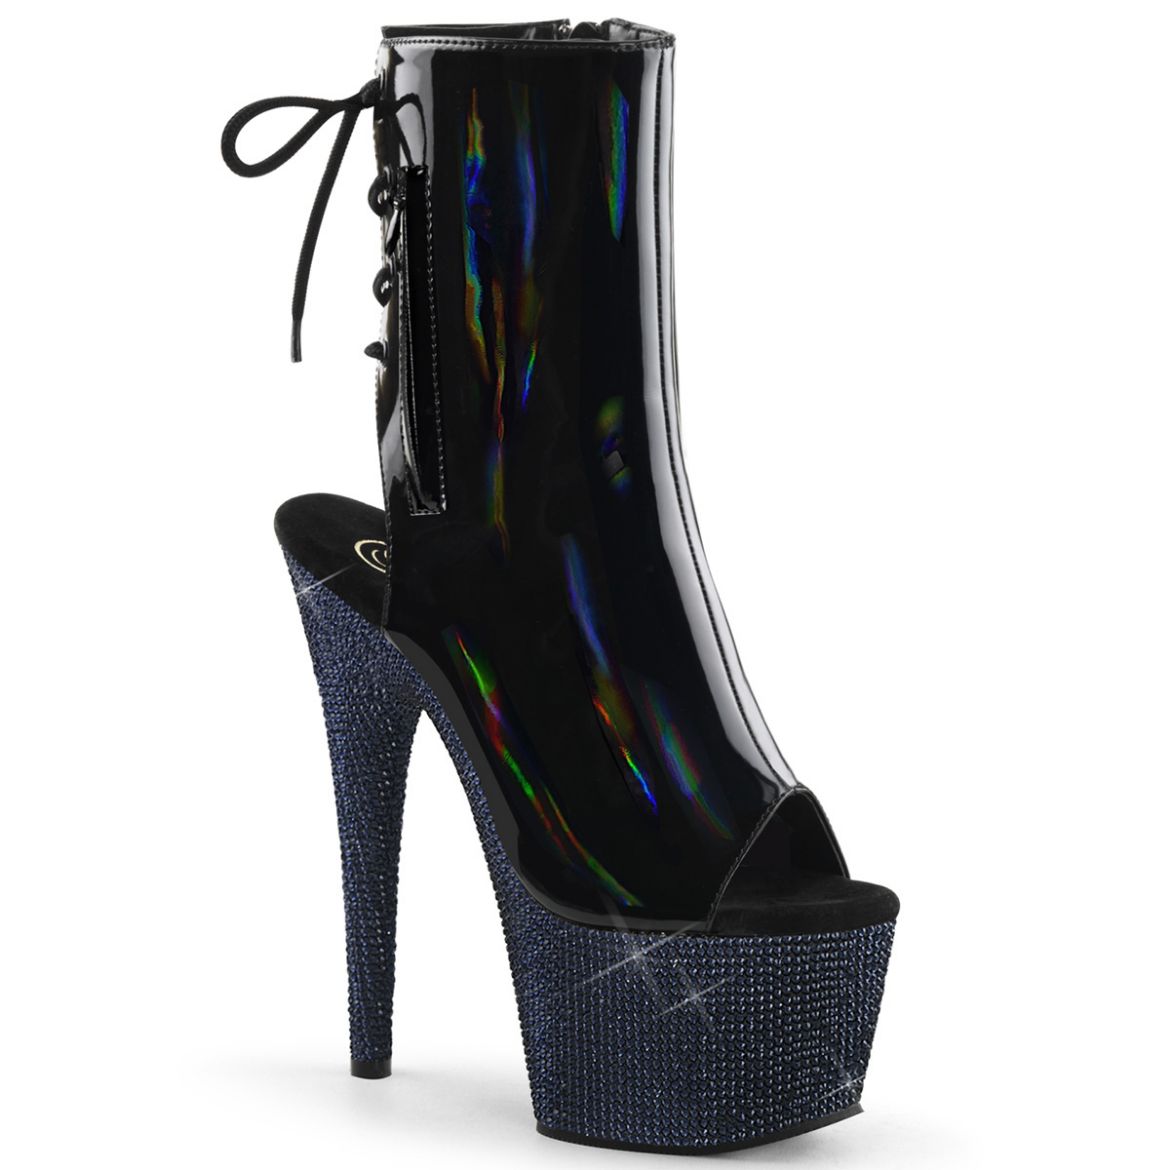 Product image of Pleaser BEJEWELED-1018DM-7 Blk Holo Pat/Midnight Blk RS 7 Inch Heel 2 3/4 Inch PF Open Toe/Heel Ankle Boot w/RS Side Zip